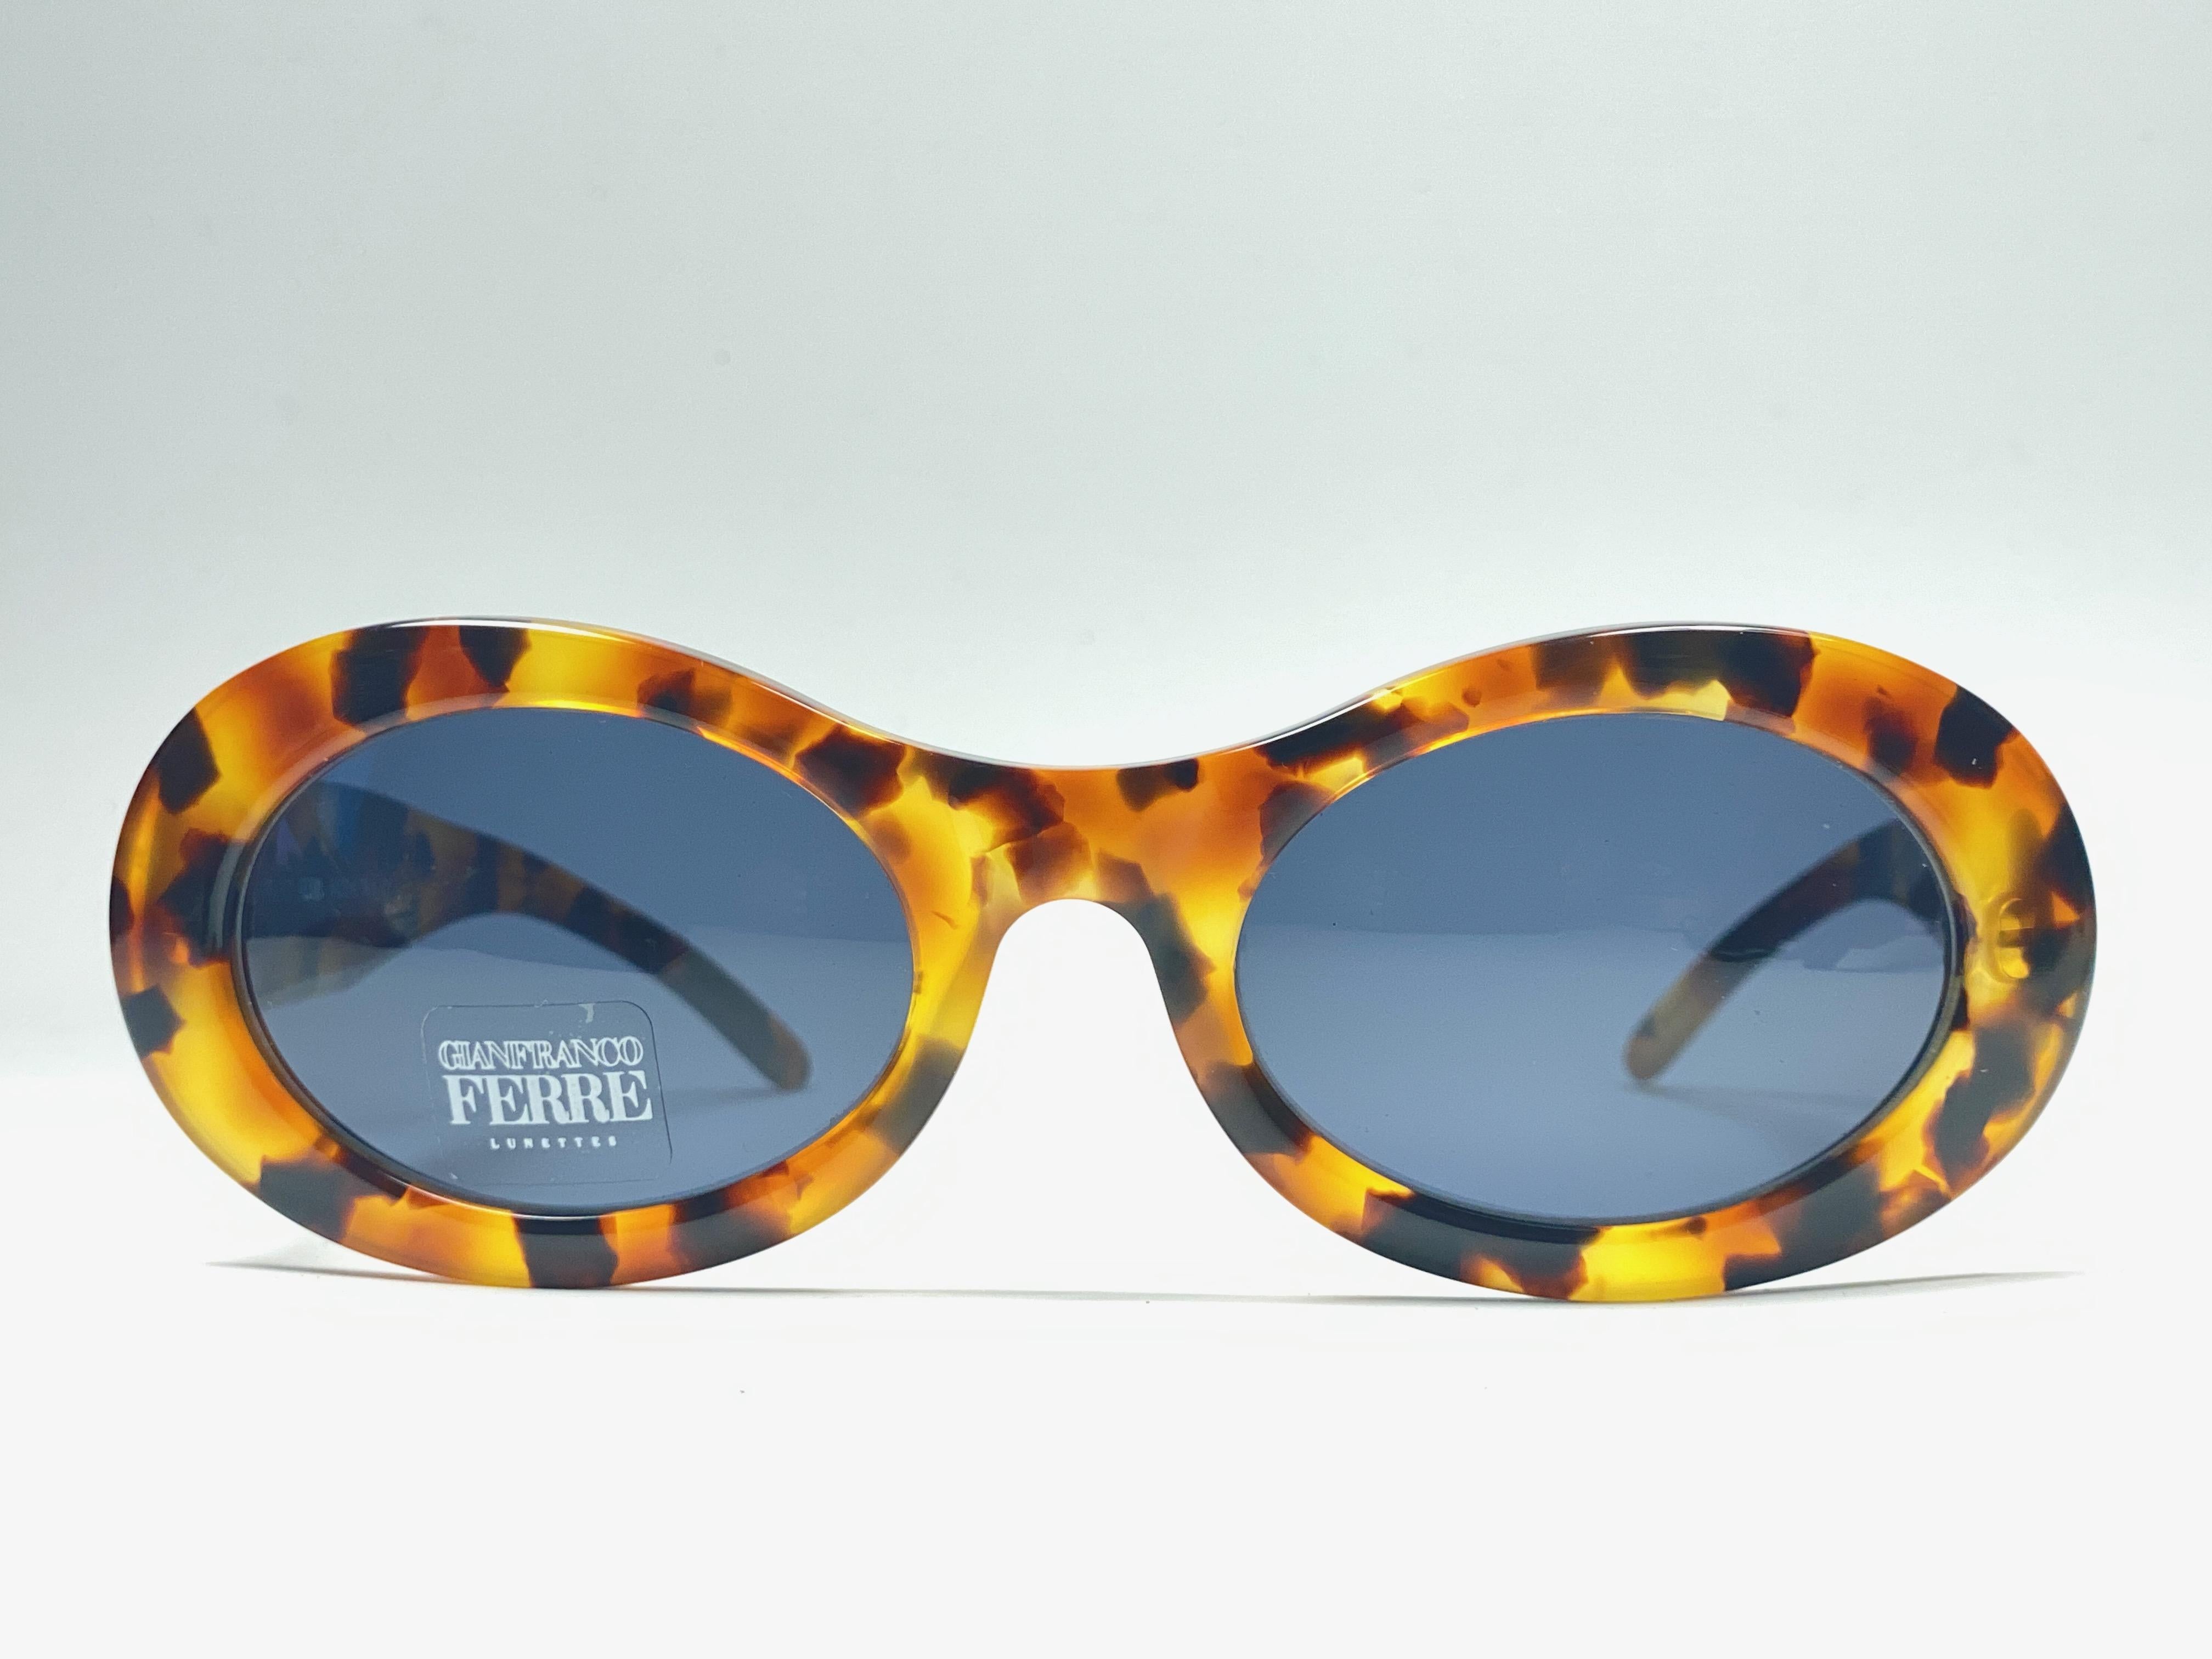 New vintage Gianfranco Ferre sunglasses.

Tortoise with gold details frame holding a pair of spotless brown lenses.   

New, never worn or displayed. 

 Made in Italy.

MEASUREMENTS 



FRONT : 14 CMS

LENS HEIGHT : 3.8 CMS

LENS WIDTH : 5.4 CMS